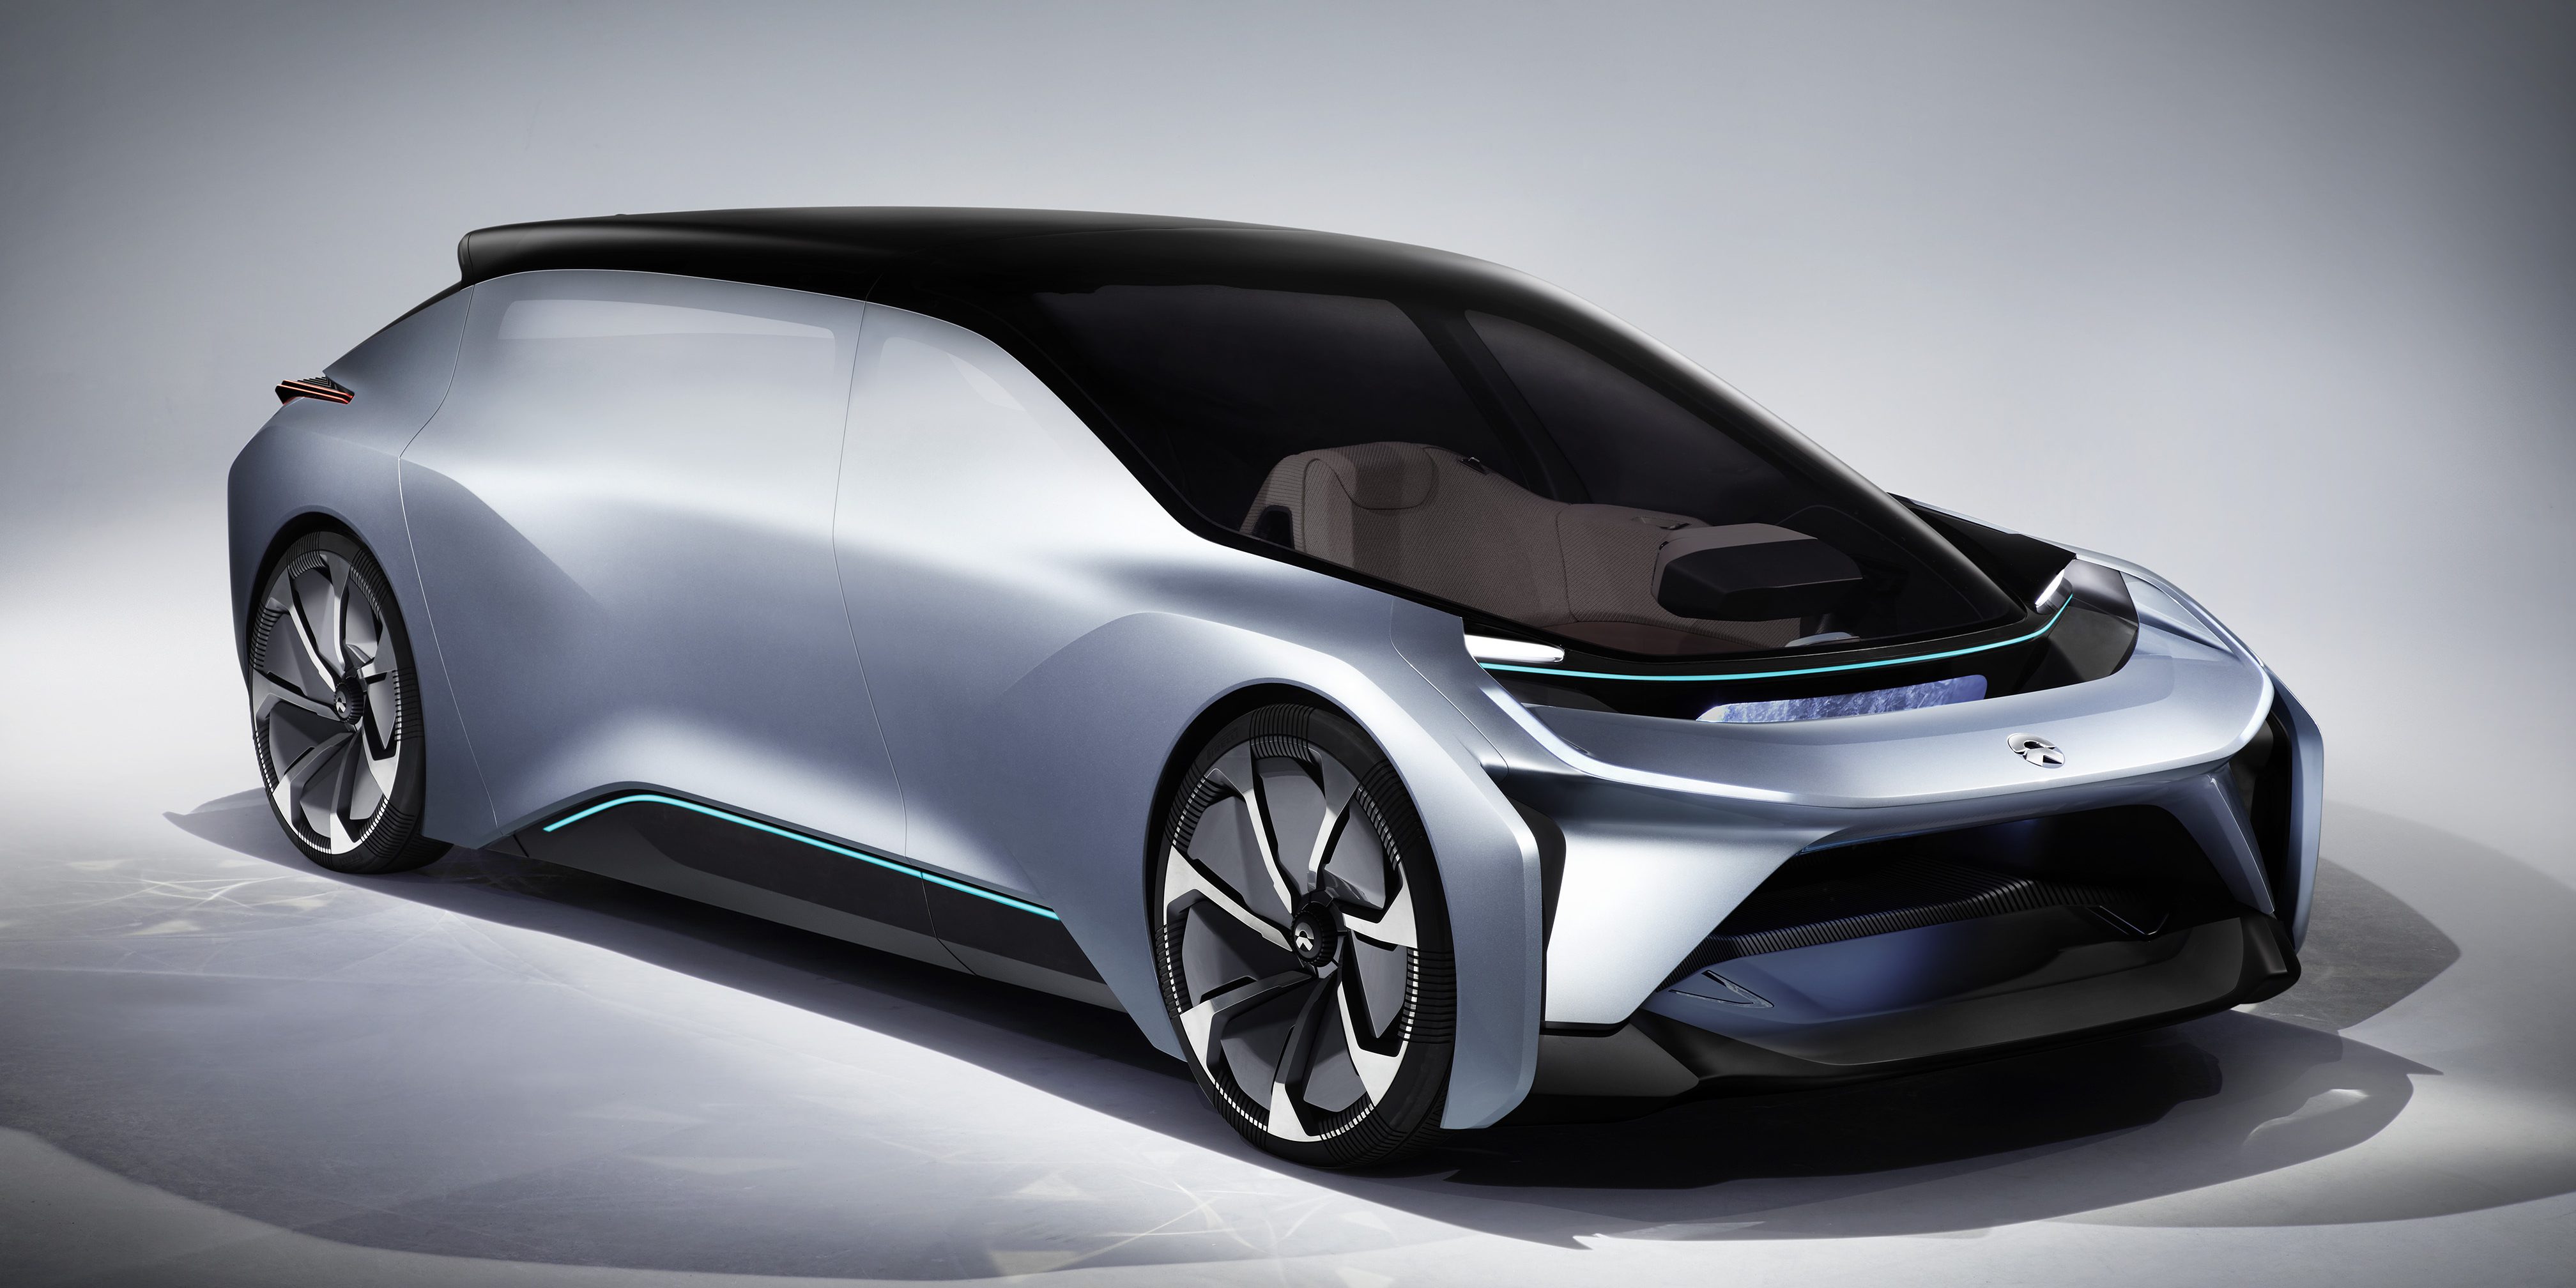 NIO unveils new selfdriving electric car concept, says they'll have